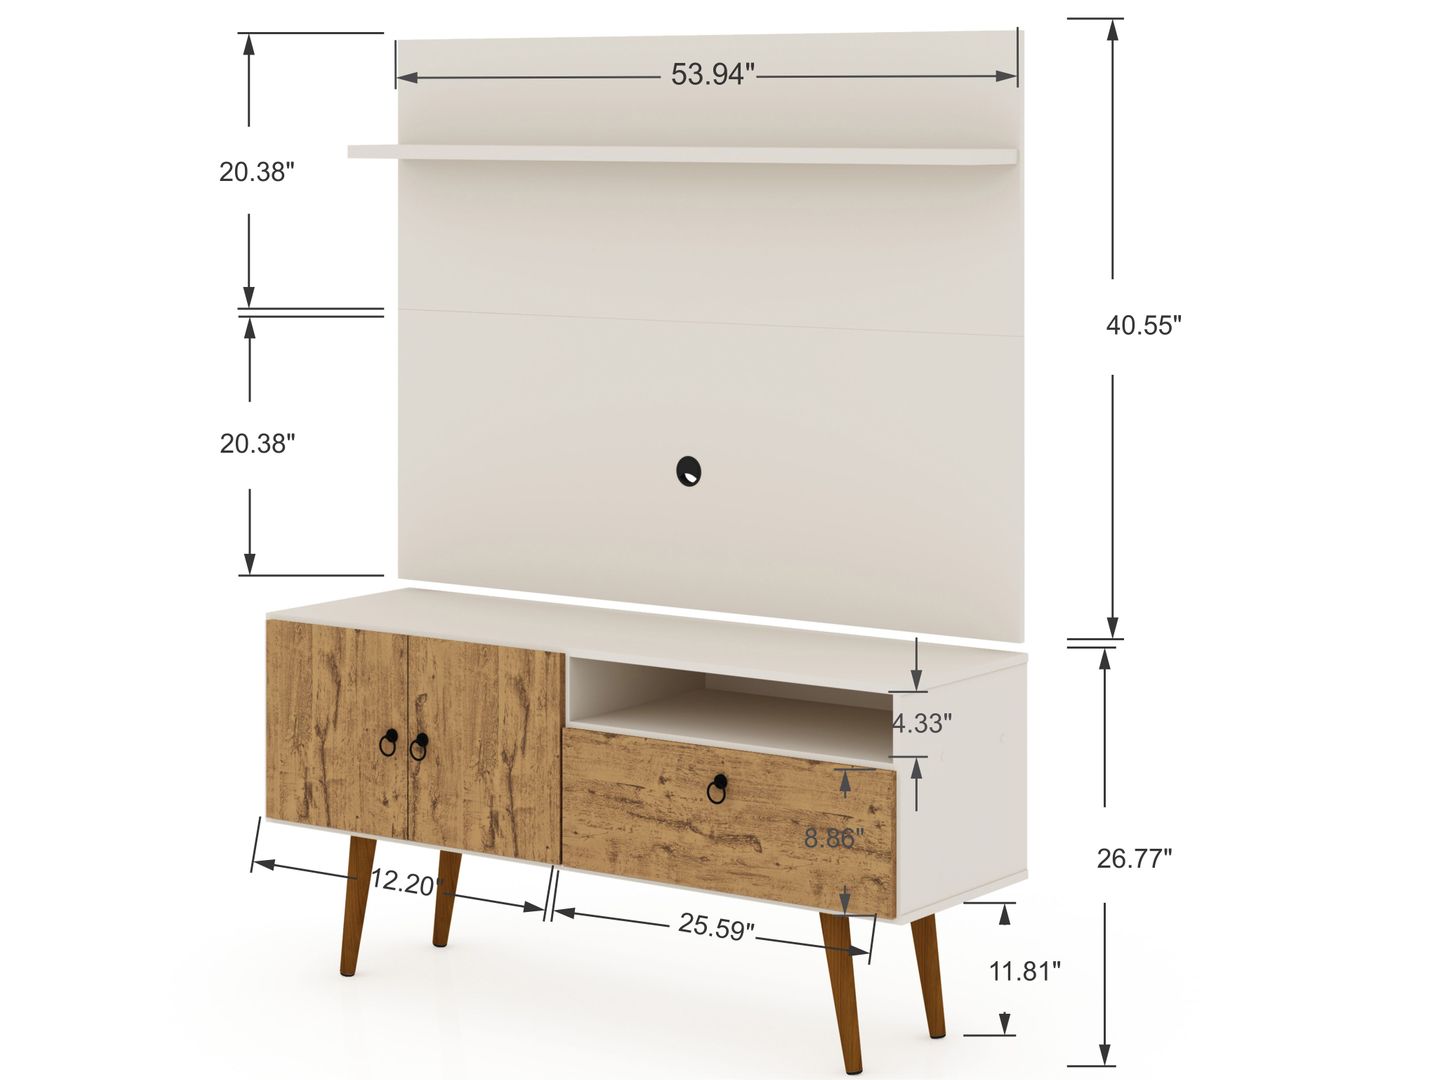 Manhattan Comfort Tribeca 53.94 Mid-Century Modern TV Stand and Panel with Media and Display Shelves in Off White and Nature